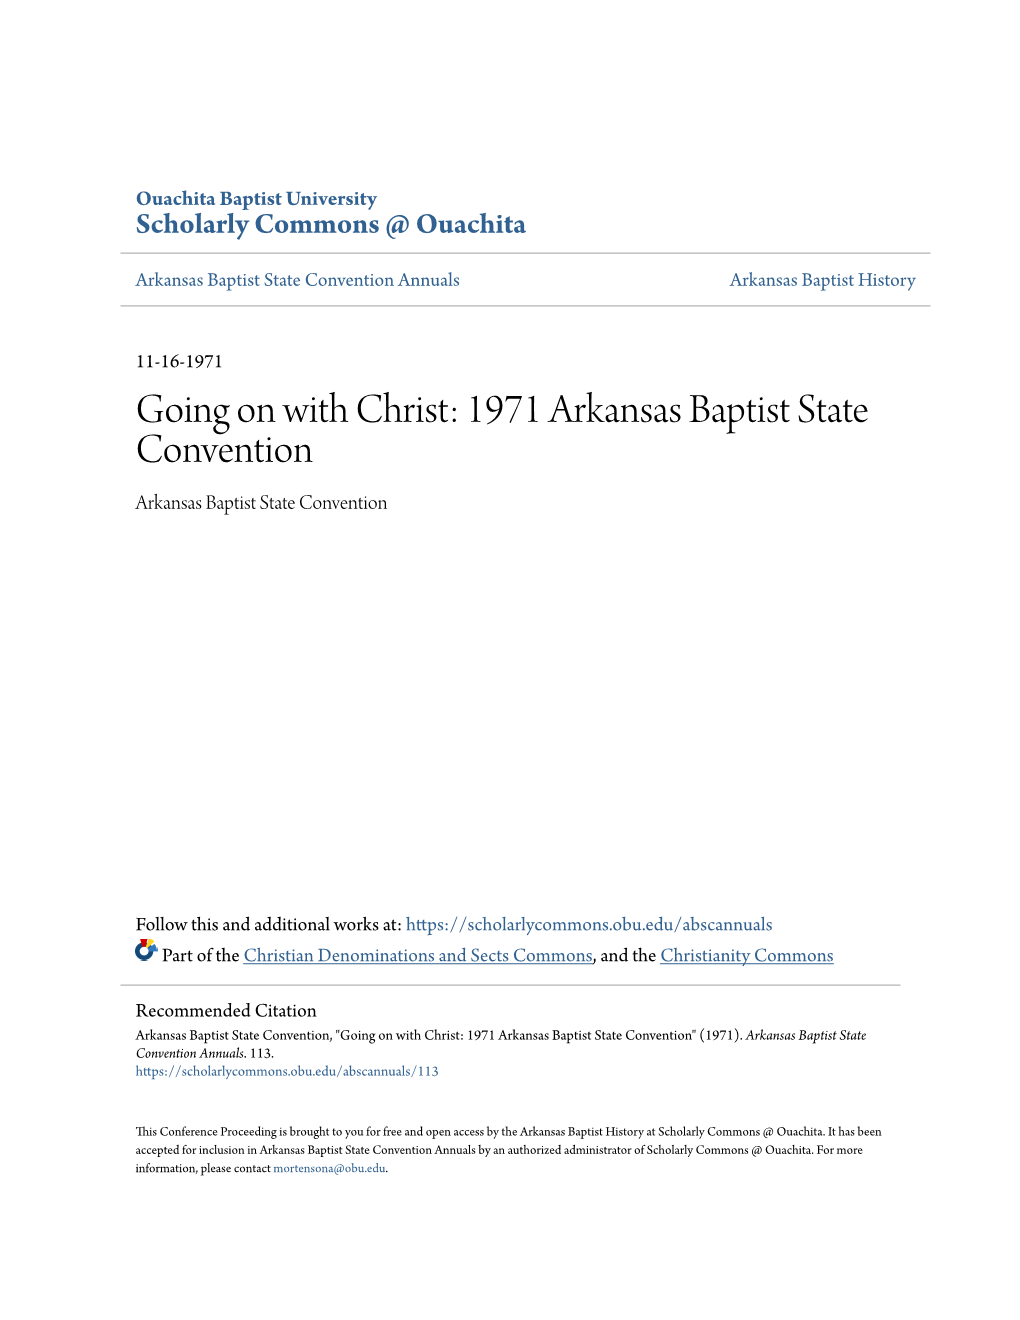 Going on with Christ: 1971 Arkansas Baptist State Convention Arkansas Baptist State Convention